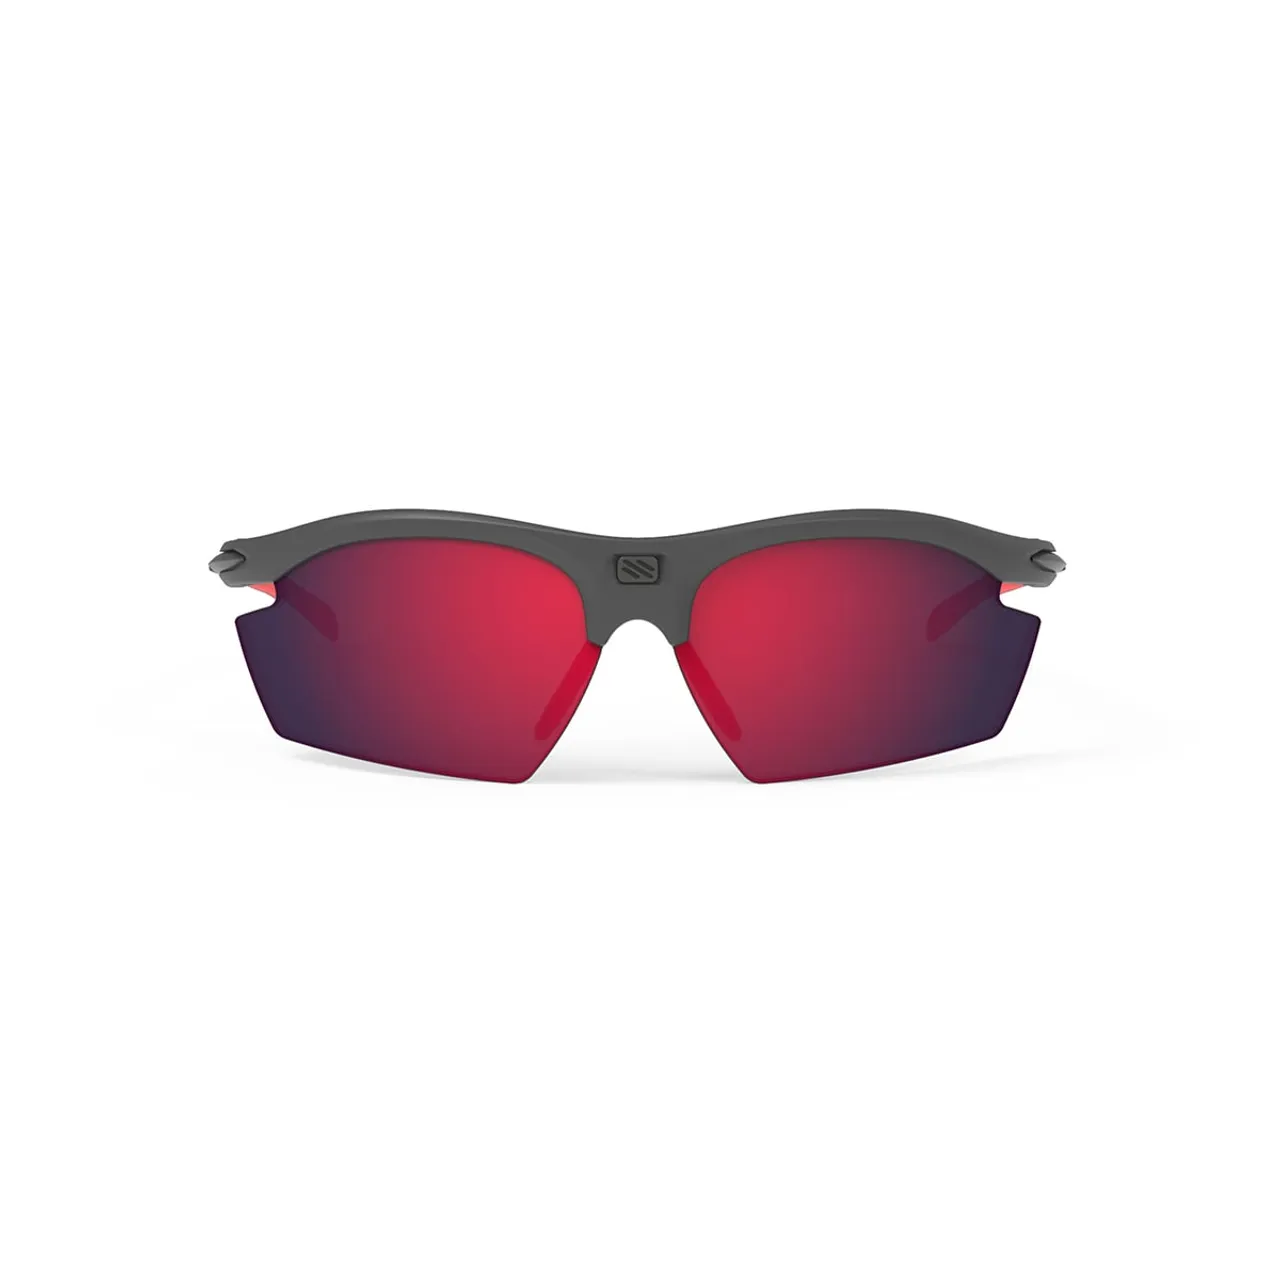 RUDY PROJECT RYDON Sportbrille